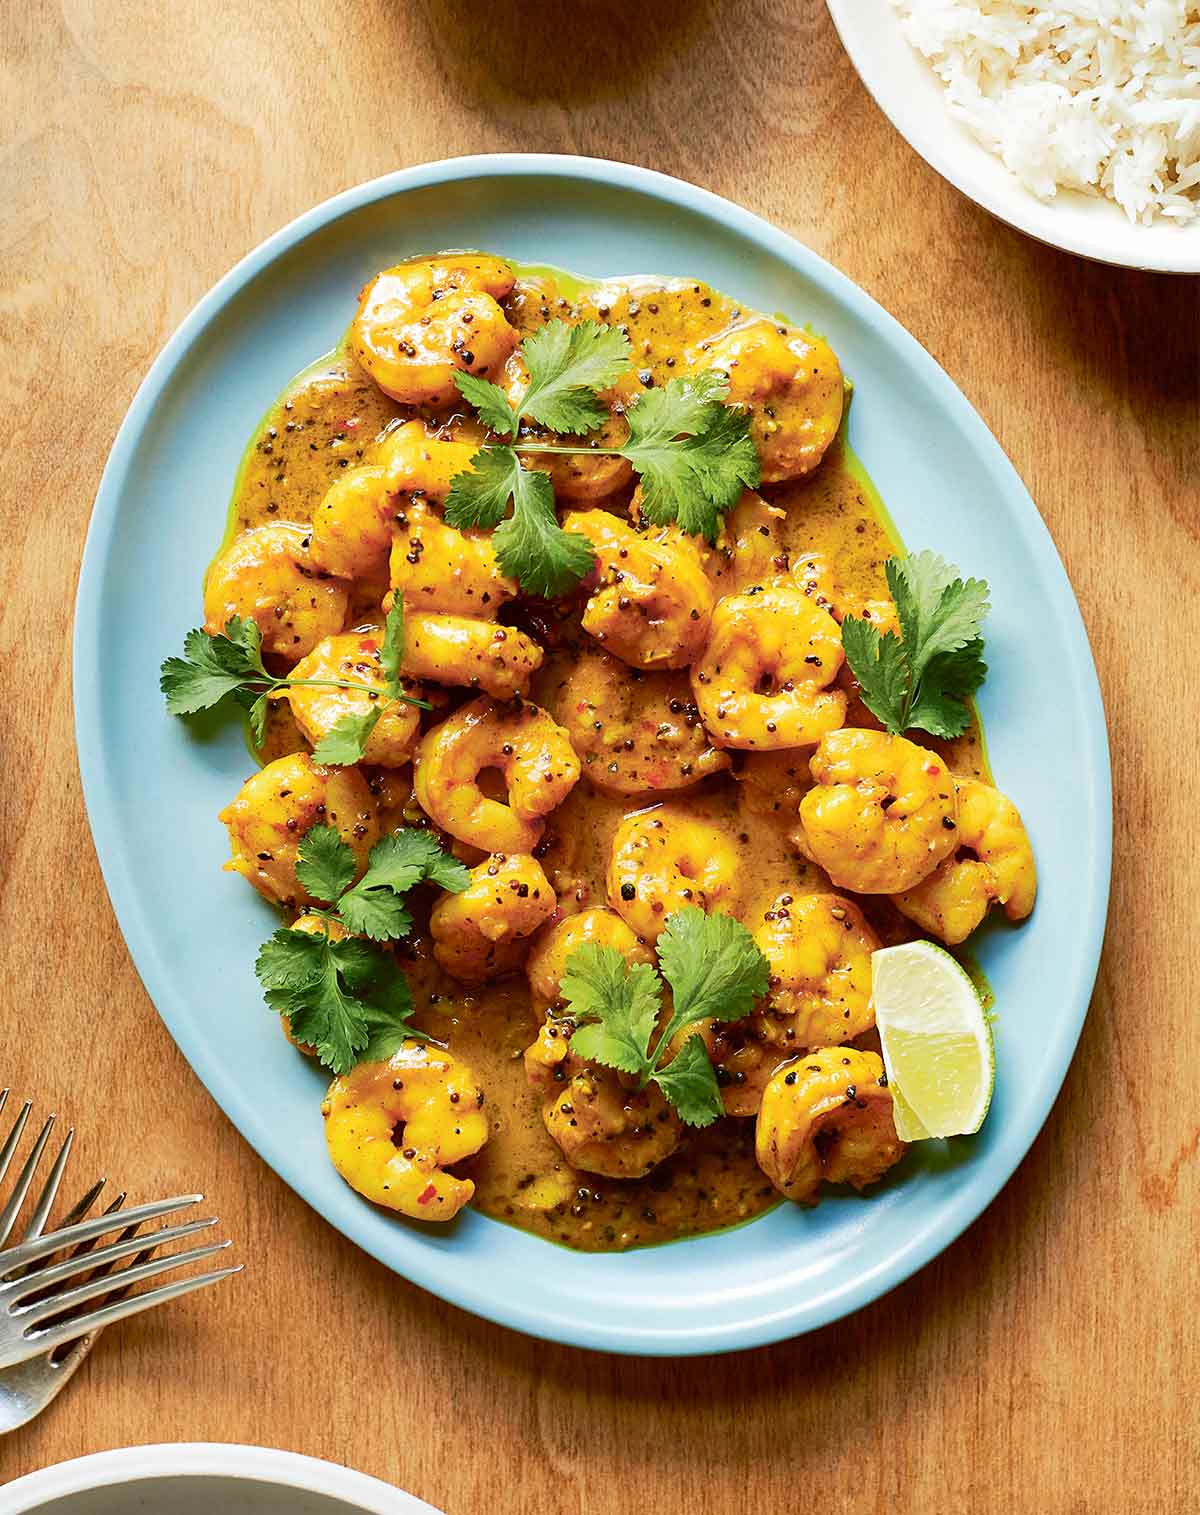 A pale blue platter, filled with fried shrimp in a deep orange sauce flecked with spices and garnished with fresh cilantro leaves.